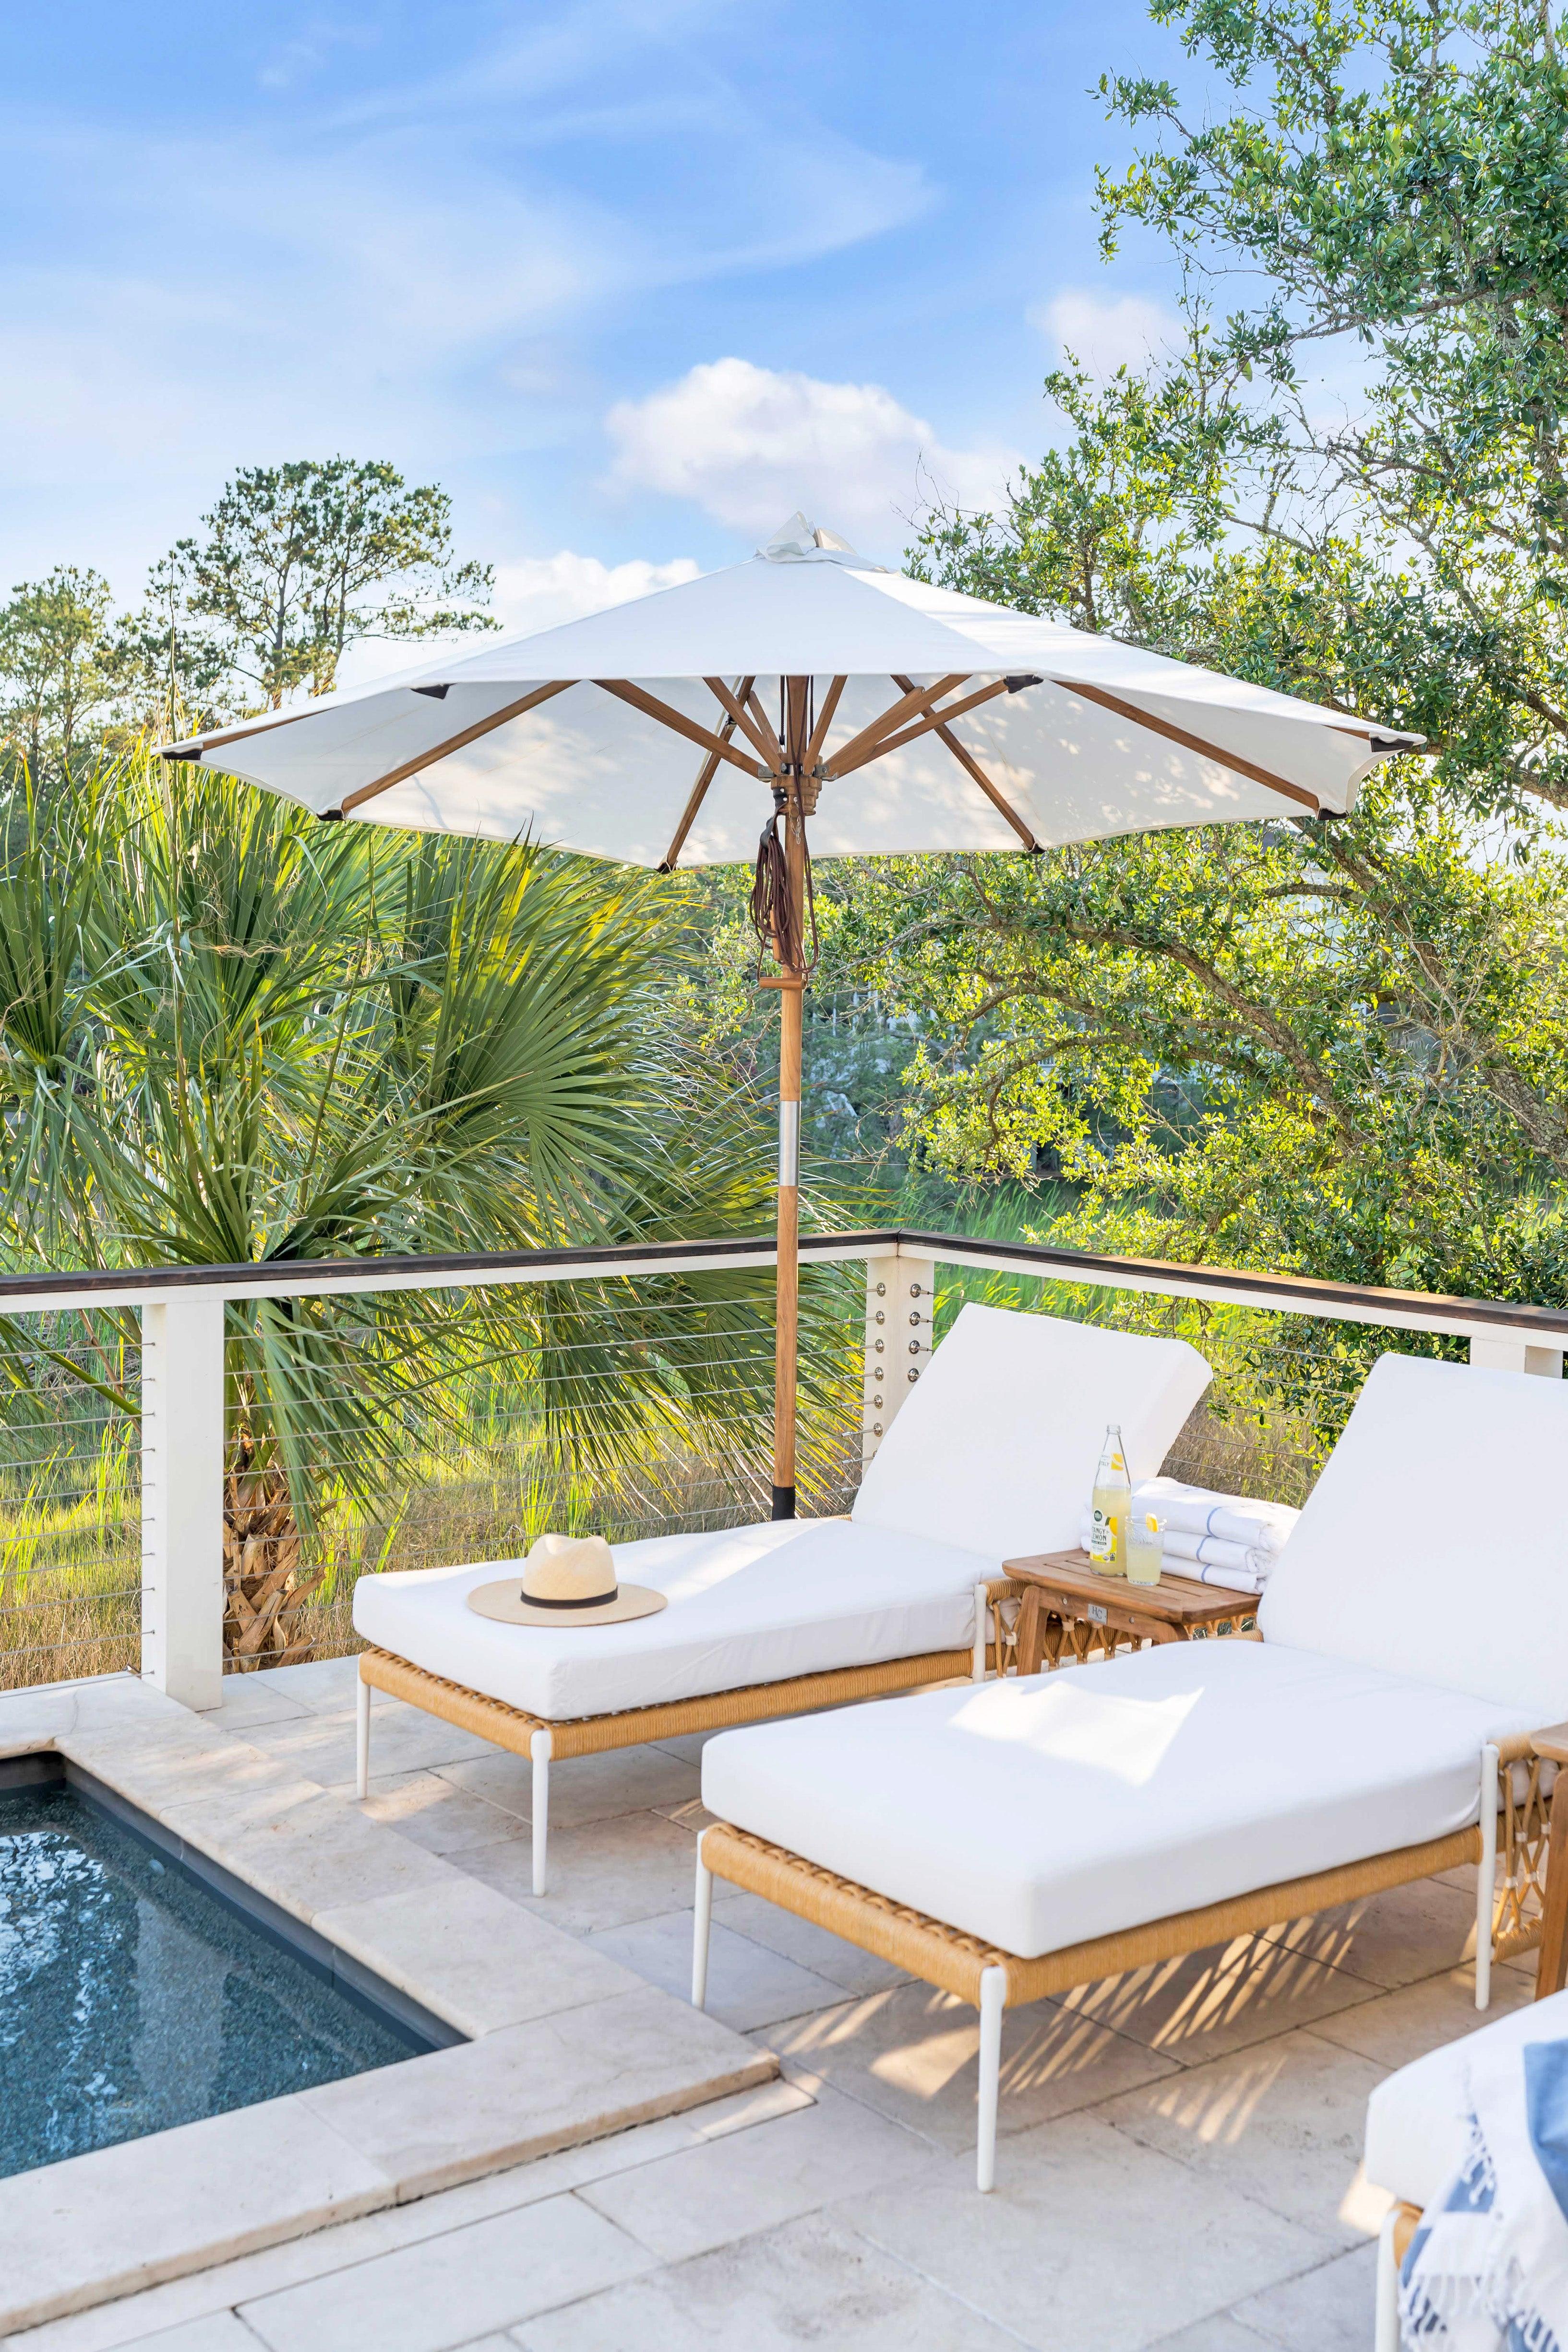 Most Comfortable Outdoor Chaise Lounge Set Featured In White Aluminum, UV Resistant Rope And Sunbrella Cushions.